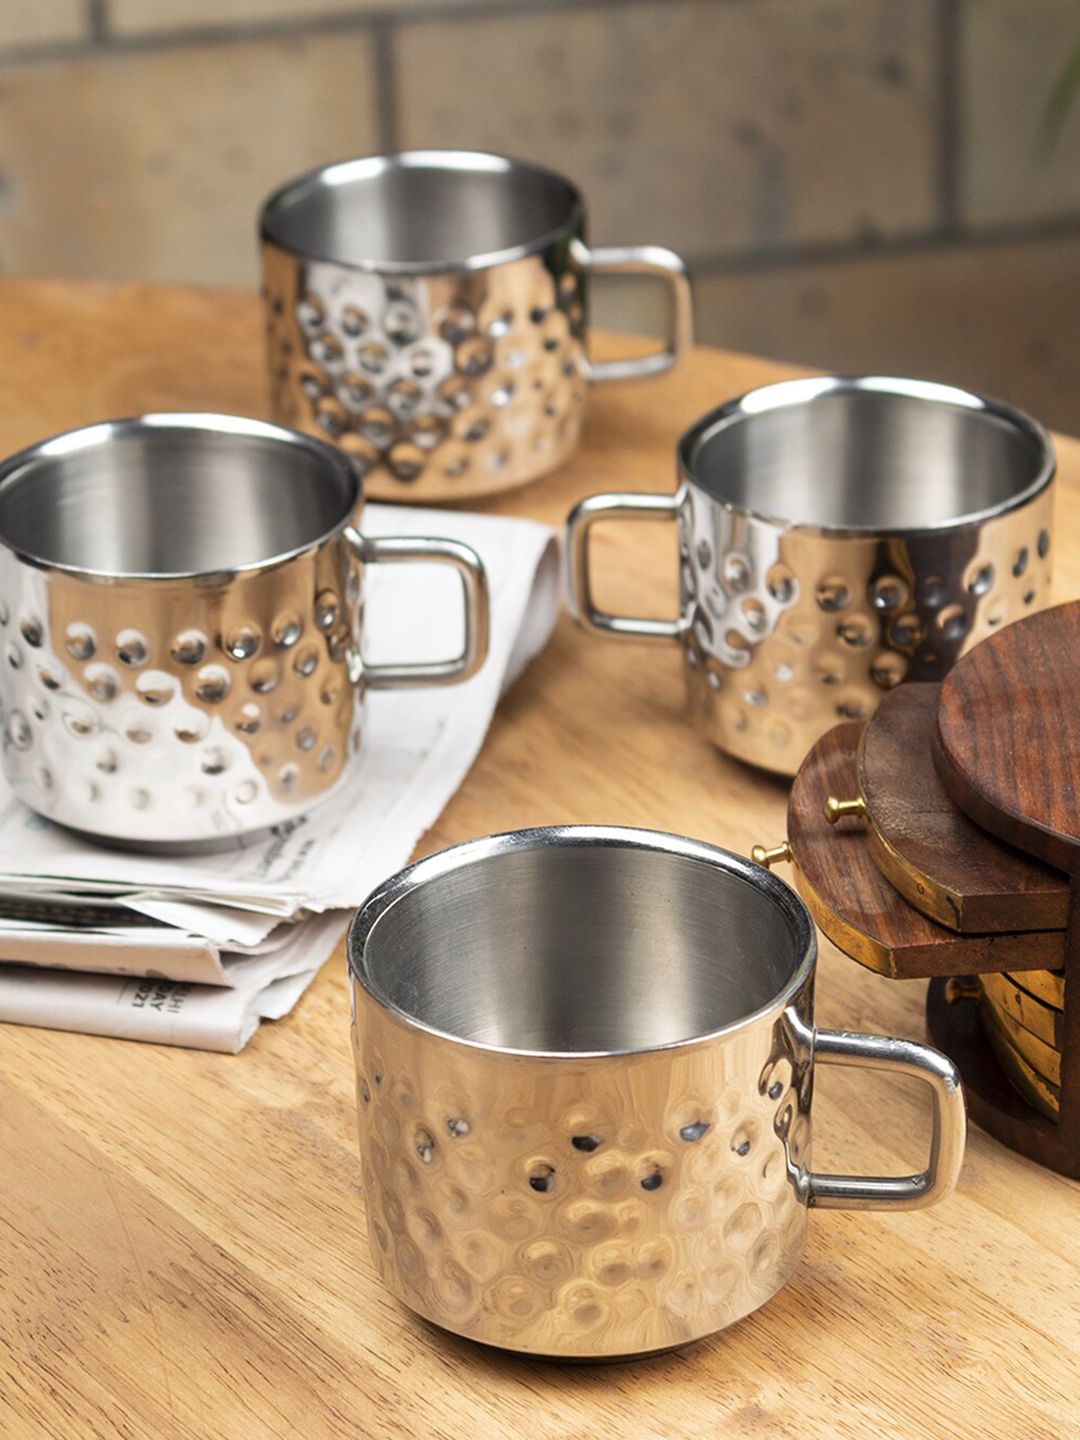 MARKET99 Silver-Toned Textured Stainless Steel Glossy Mug and Bowl Set of Cups and Mugs Price in India